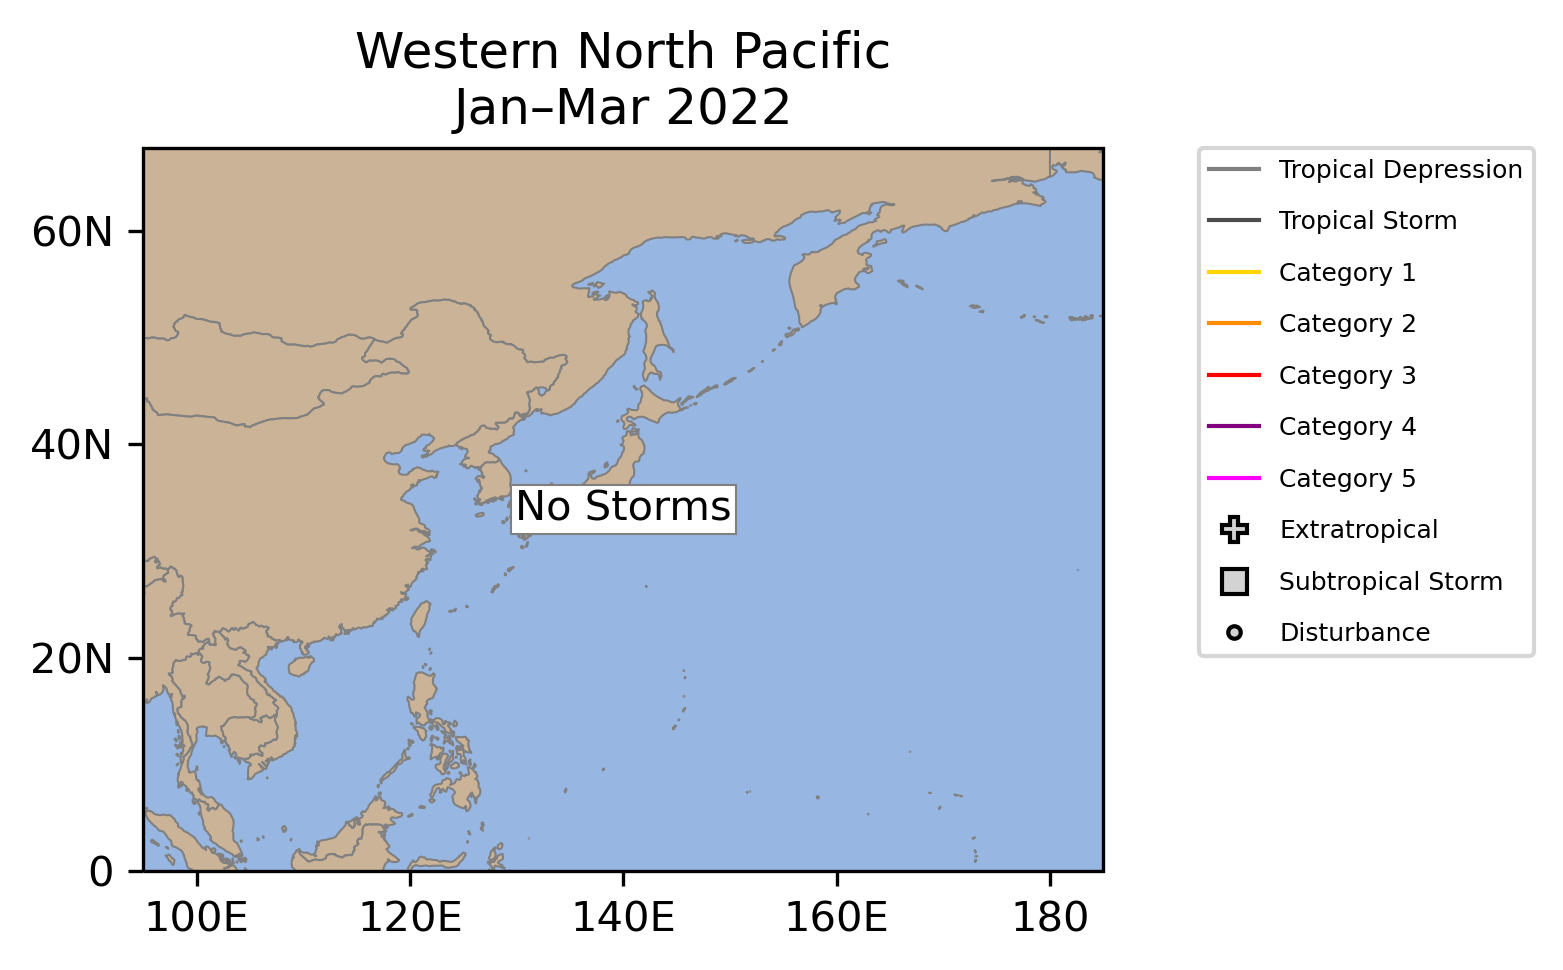 West Pacific Tropical Cyclone Storm Tracks January-March 2022